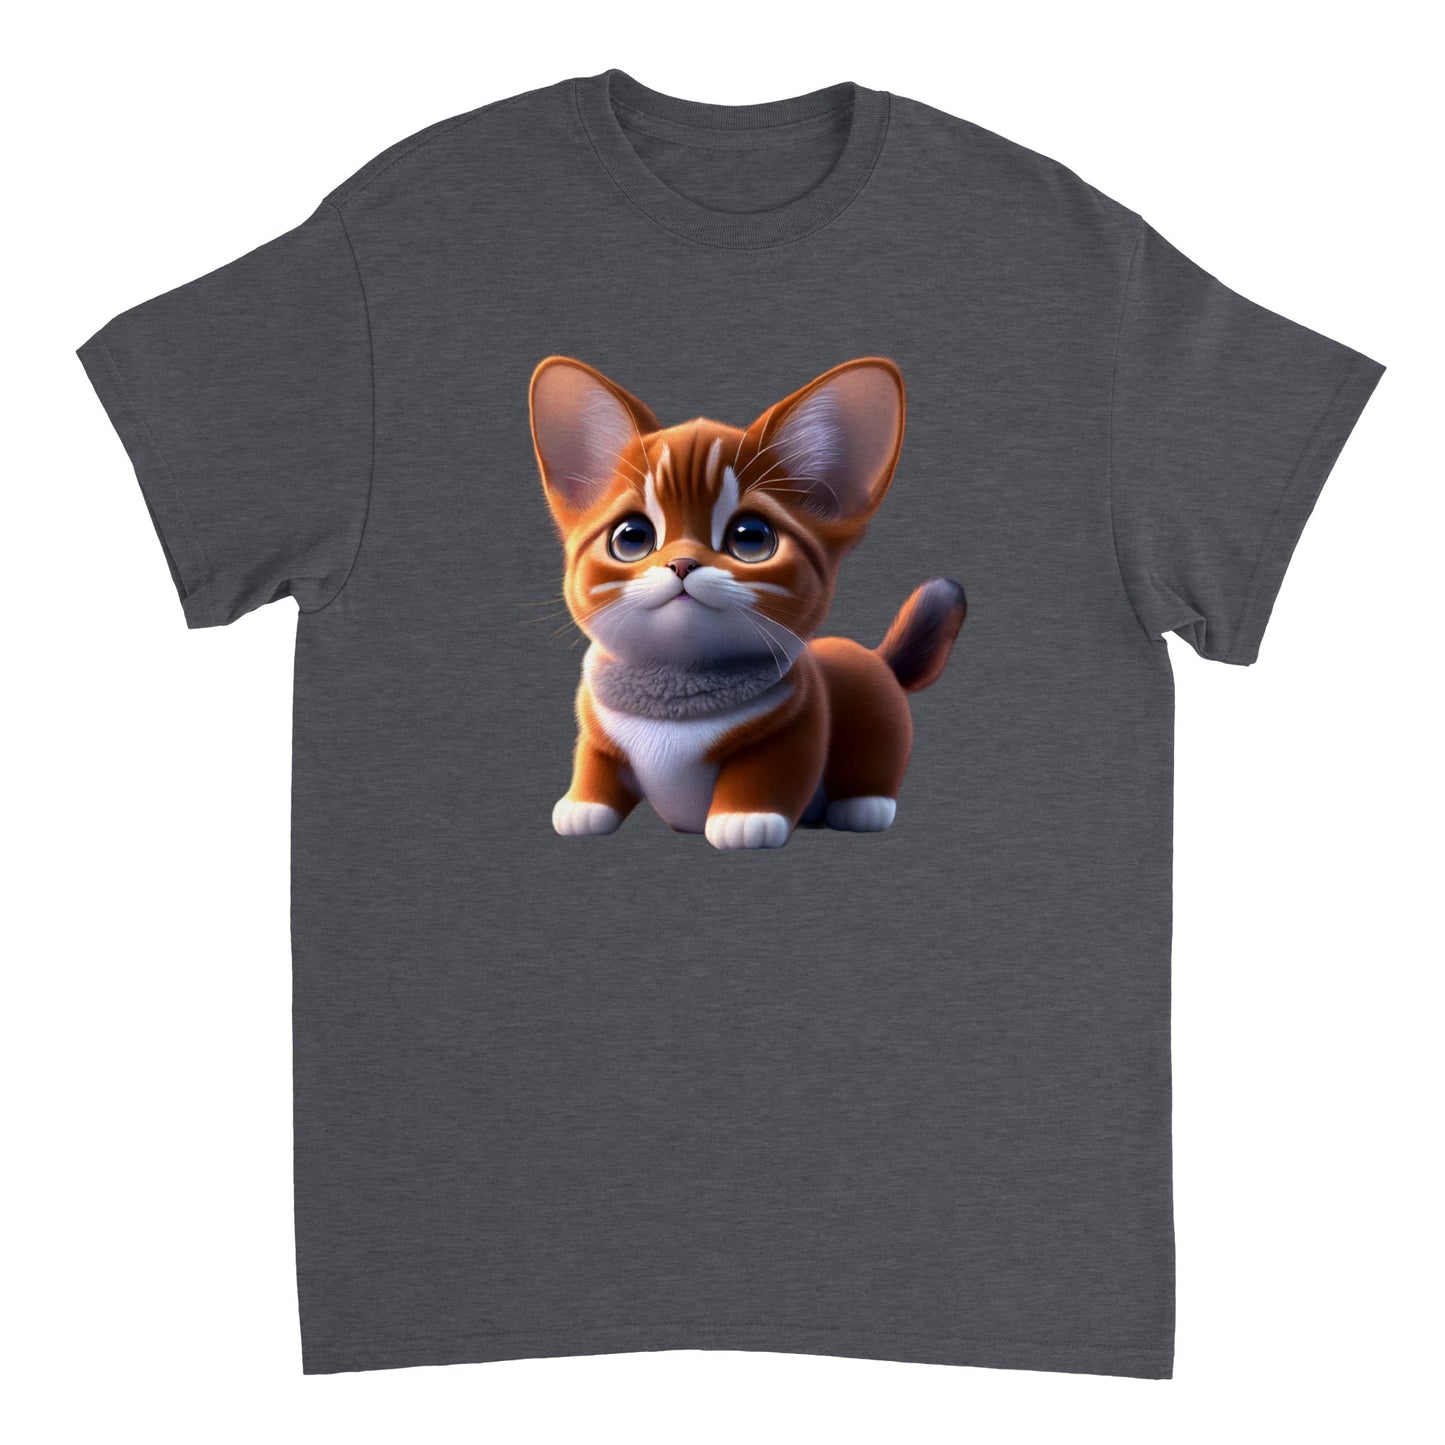 Adorable, Cool, Cute Cats and Kittens Toy - Heavyweight Unisex Crewneck T-shirt 24